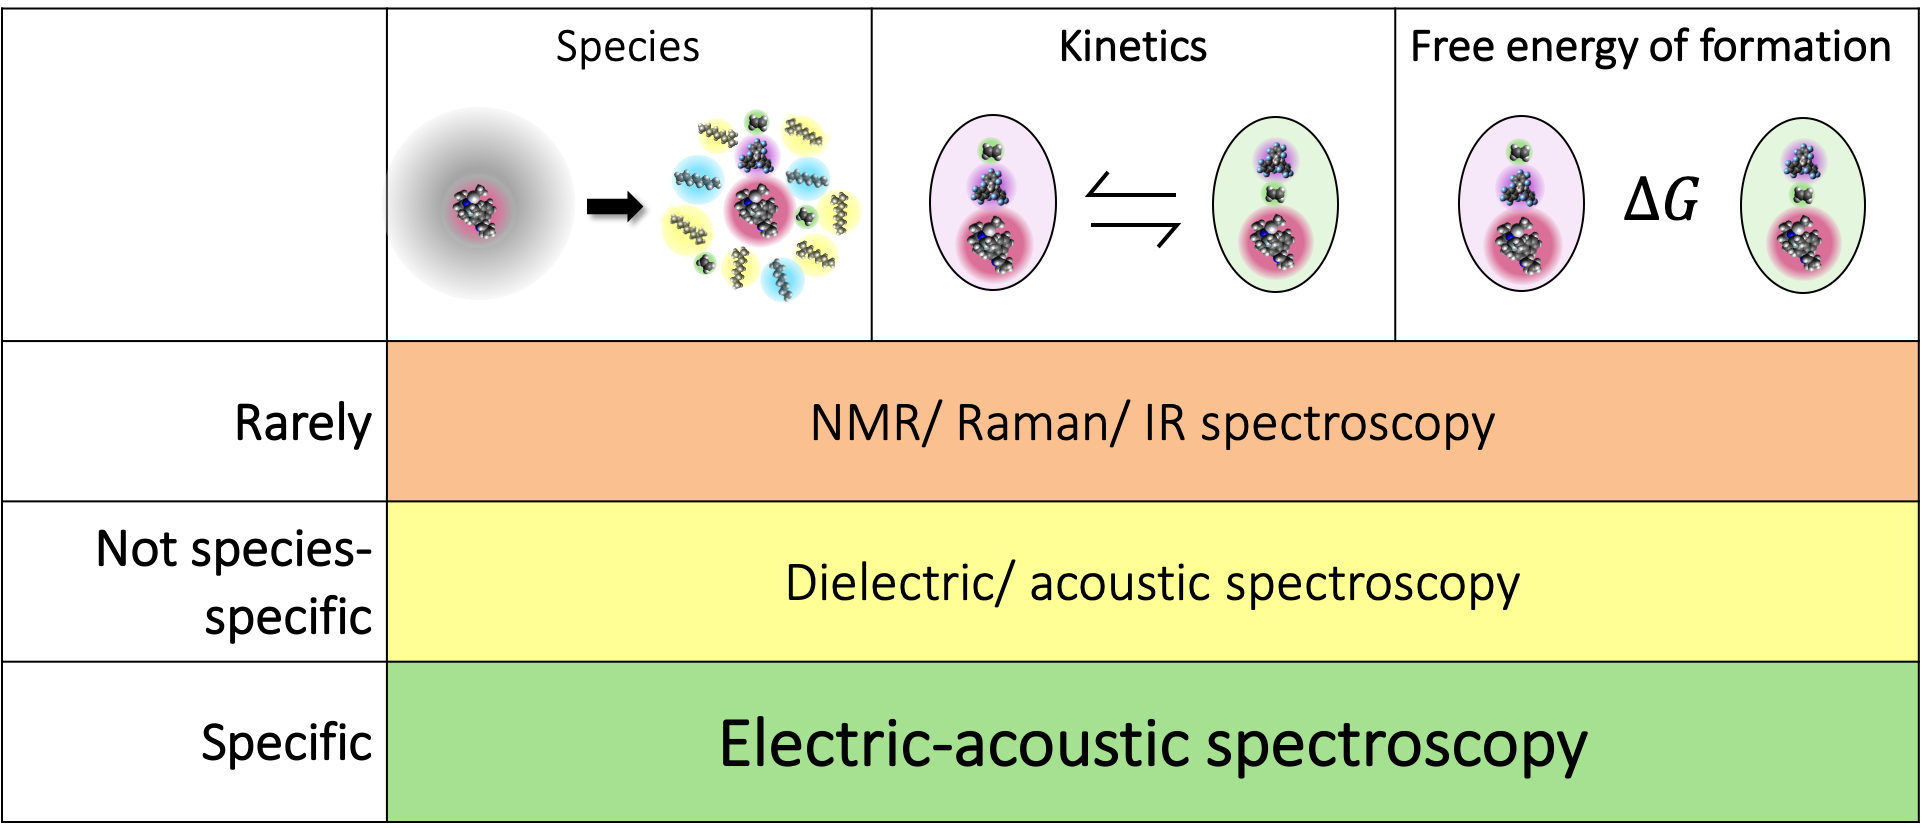 Species, kinetics, and free energies of formation and their detection by NMR, acoustic technics, and our proposed spectroscopy